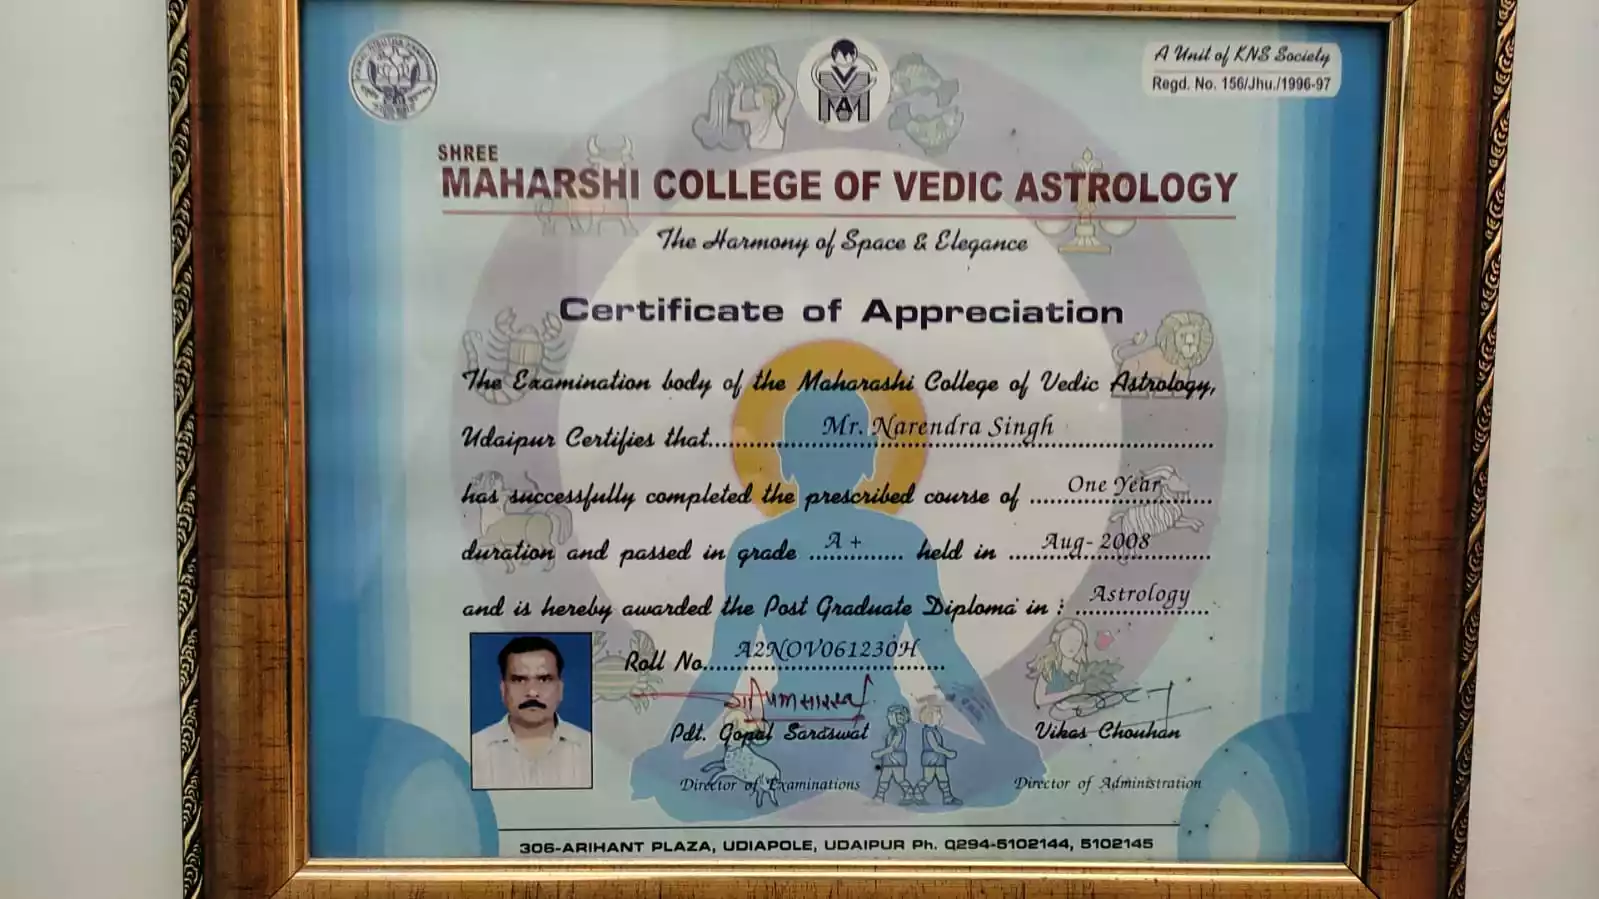  Certificate Of Appreciation For Post Graduate Diploma In Astrology